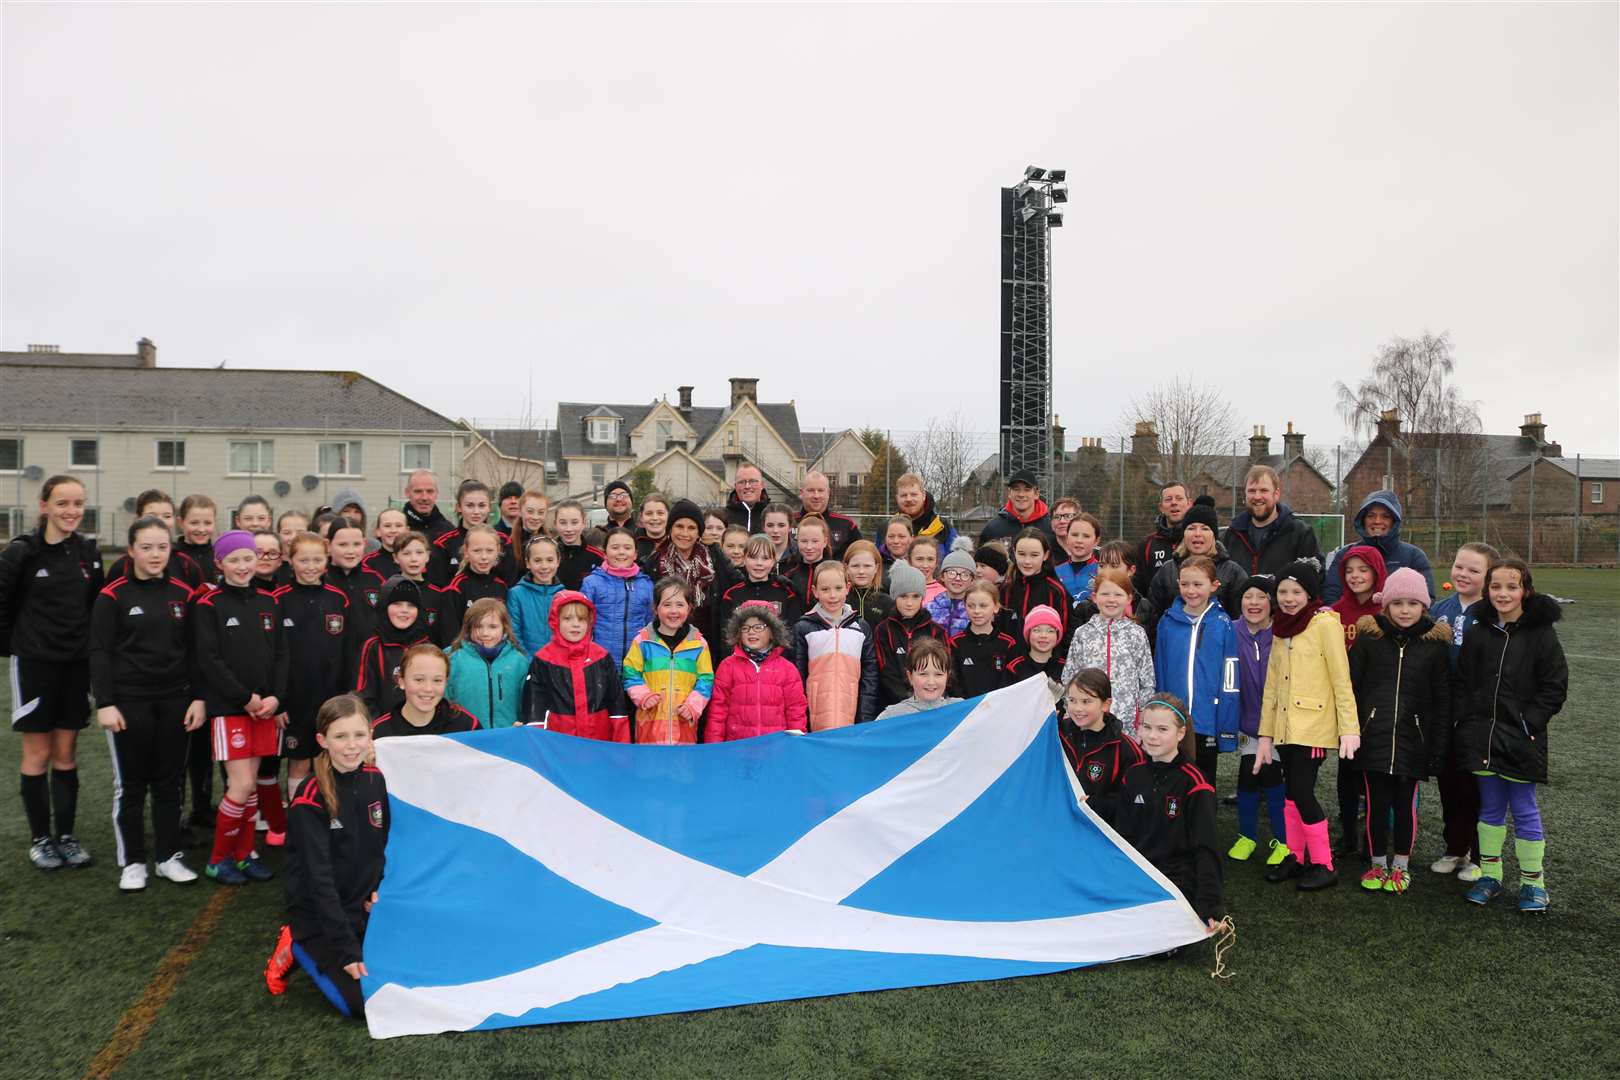 City of Downey ambassador Claudia Echeverria was presented with a giant Saltire to take to home to California after watching Thistle Girls in action.